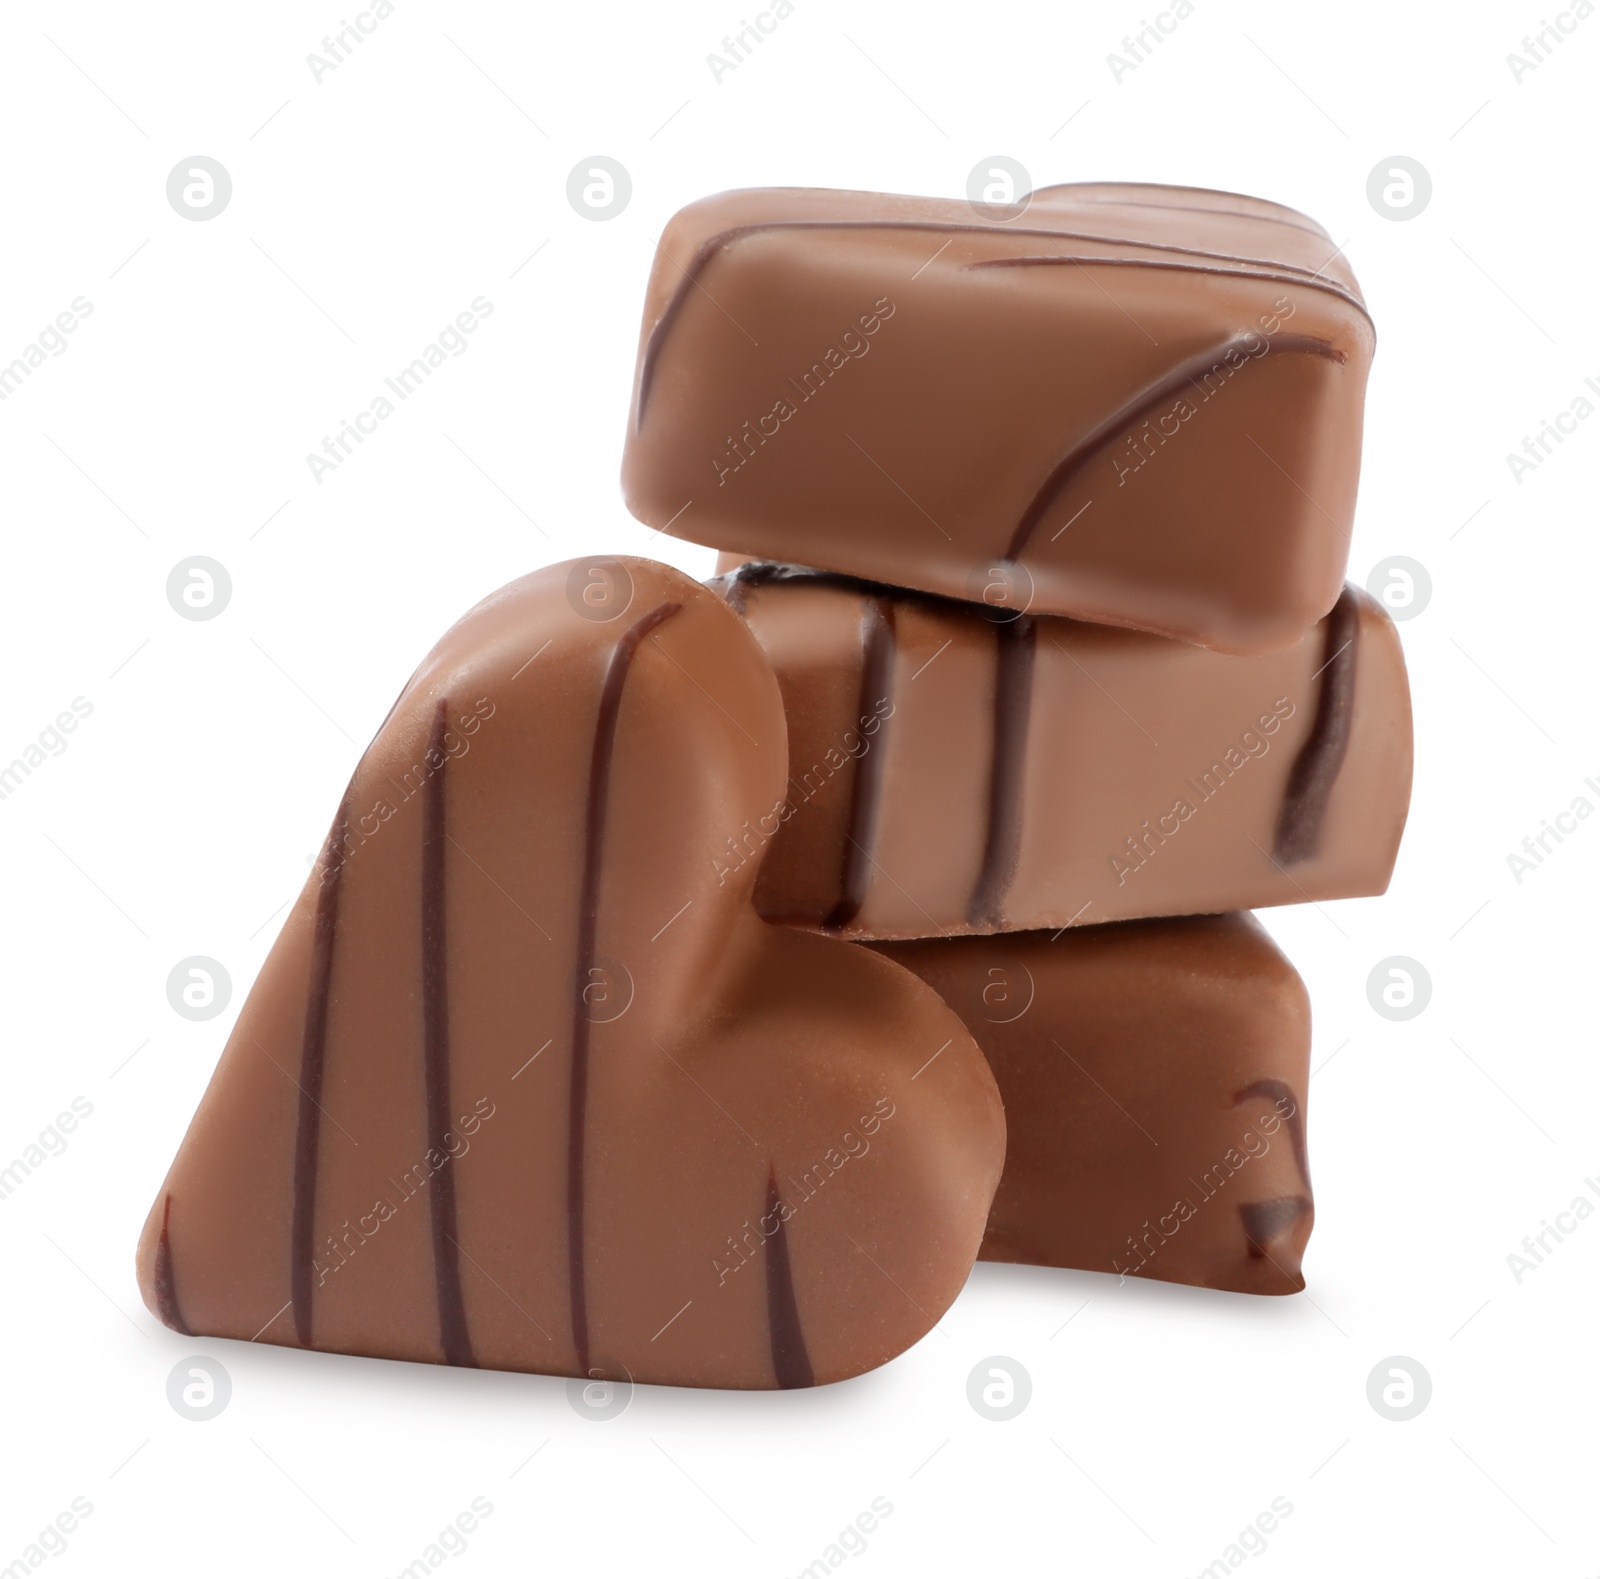 Photo of Beautiful heart shaped chocolate candies on white background